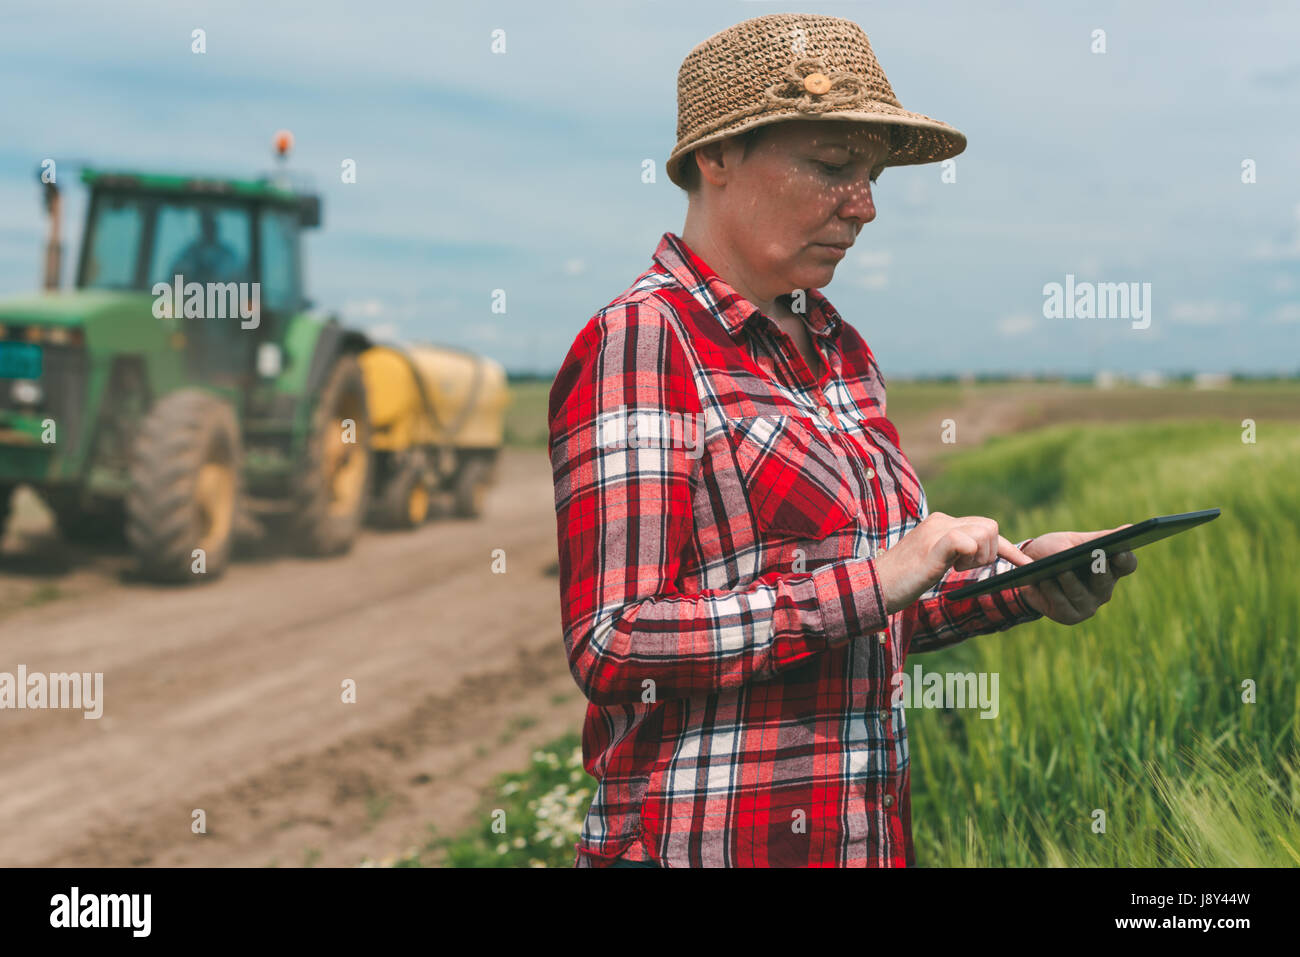 Smart farming, using modern technology in agricultural activity, female farmer agronomist with digital tablet computer using mobile app in wheat crops Stock Photo